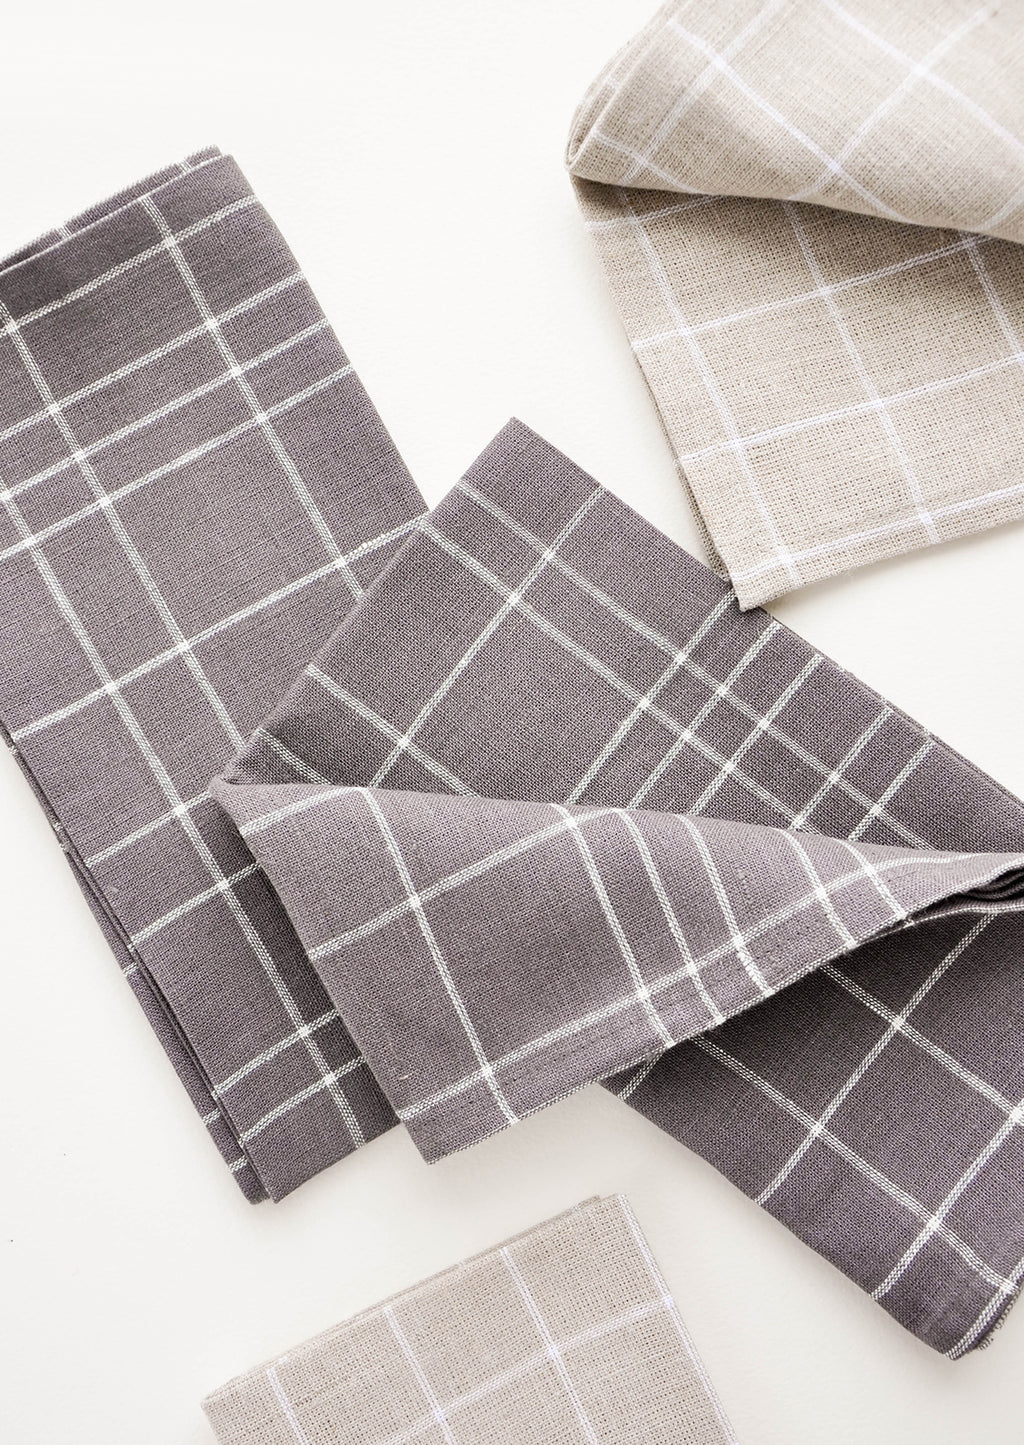 2: Grid Linen Napkin Sets in Flax & Charcoal | LEIF